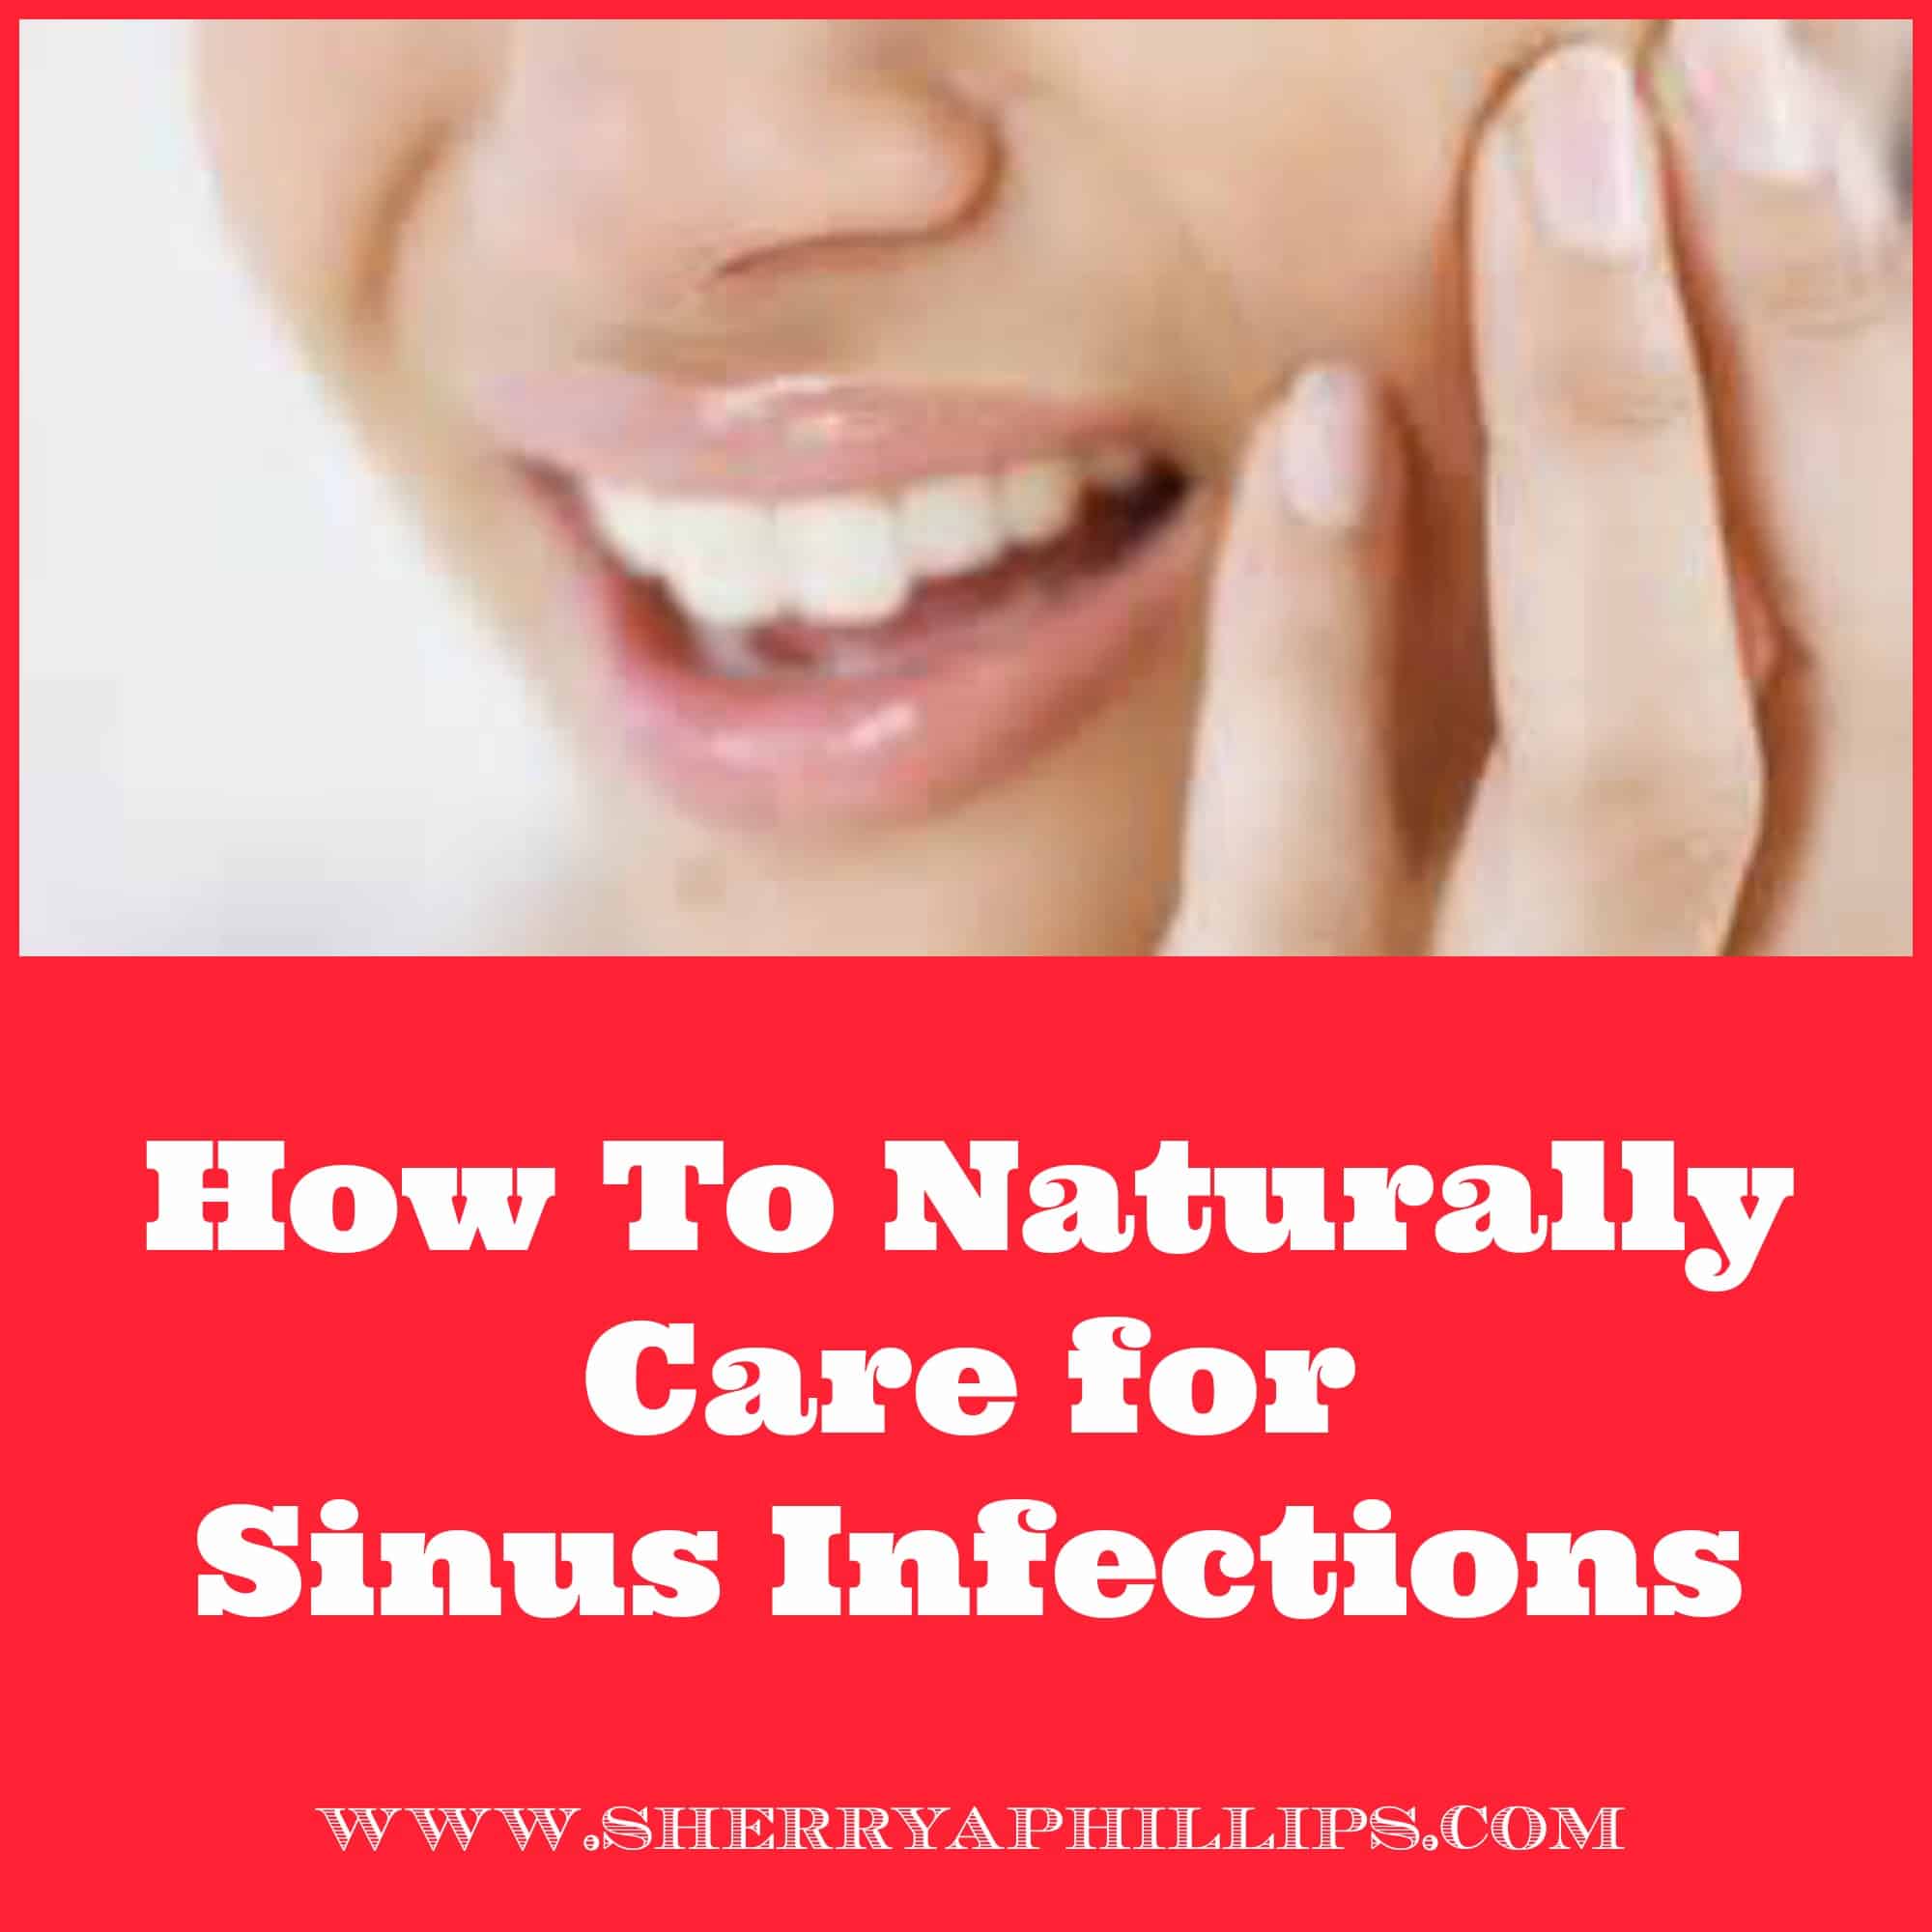 How to Naturally Care for Sinus Infections